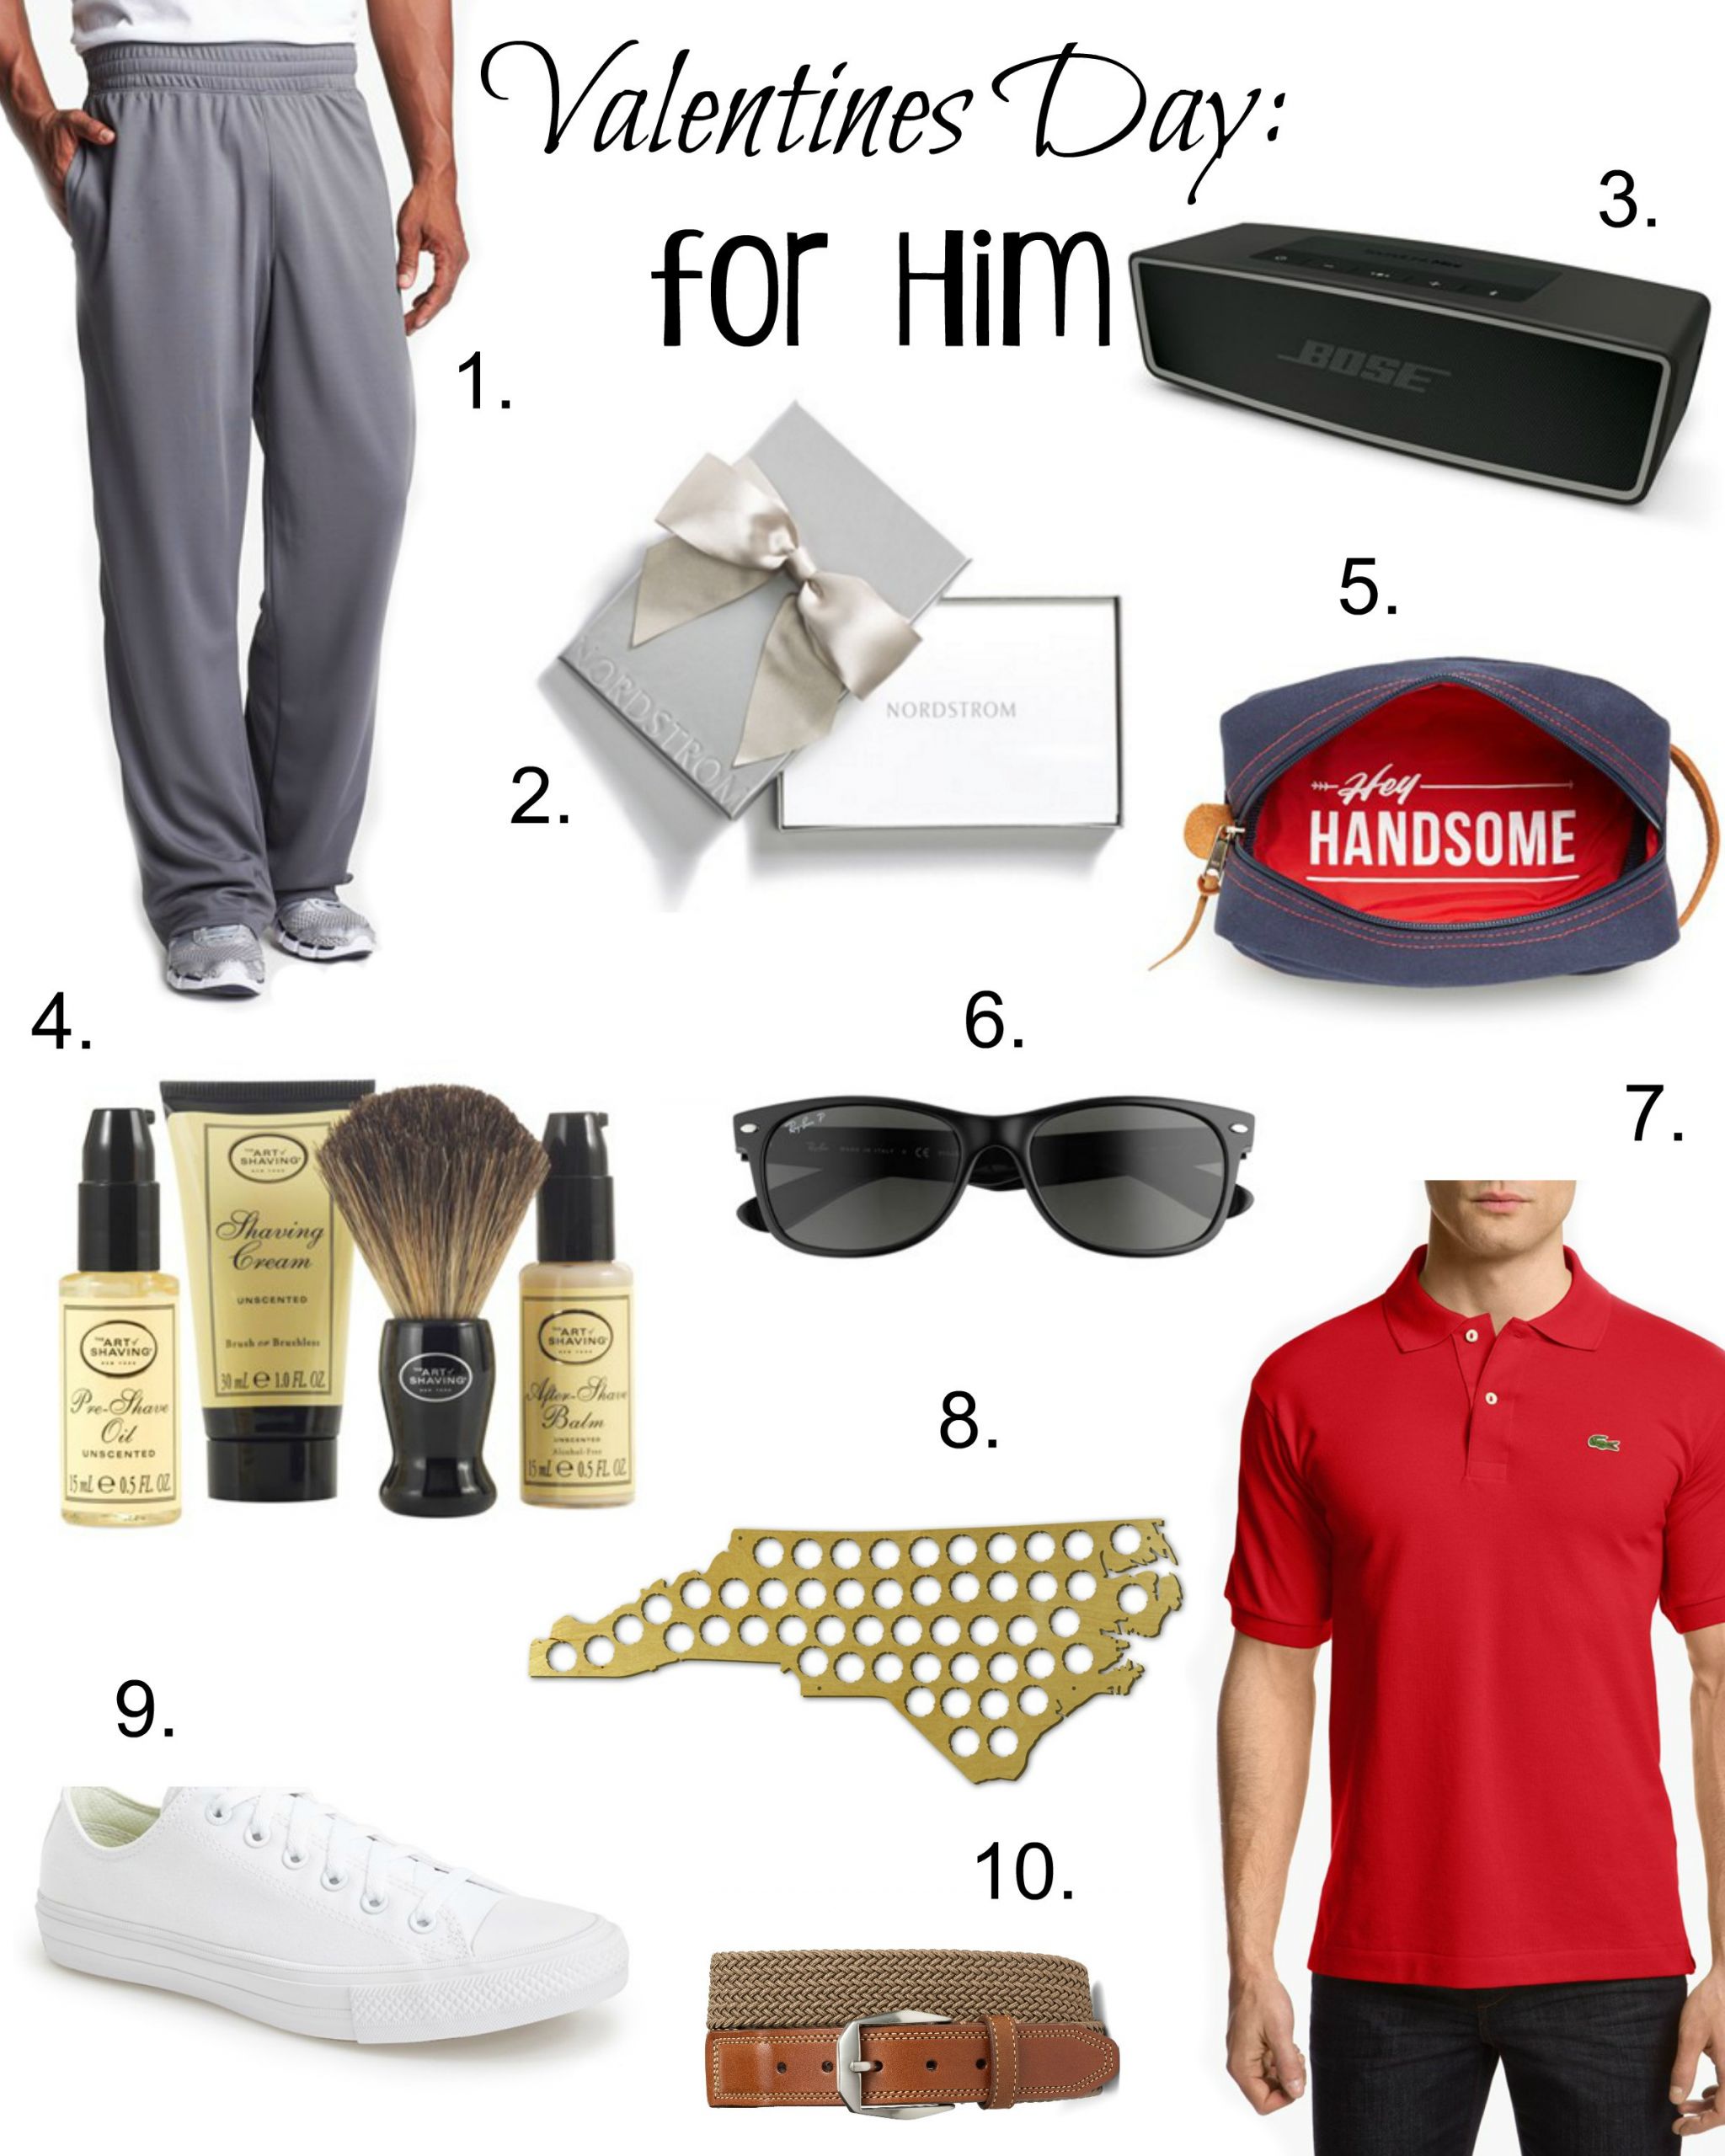 Valentines Day Gifts For Him
 Top 10 Valentines Day Gifts For Him